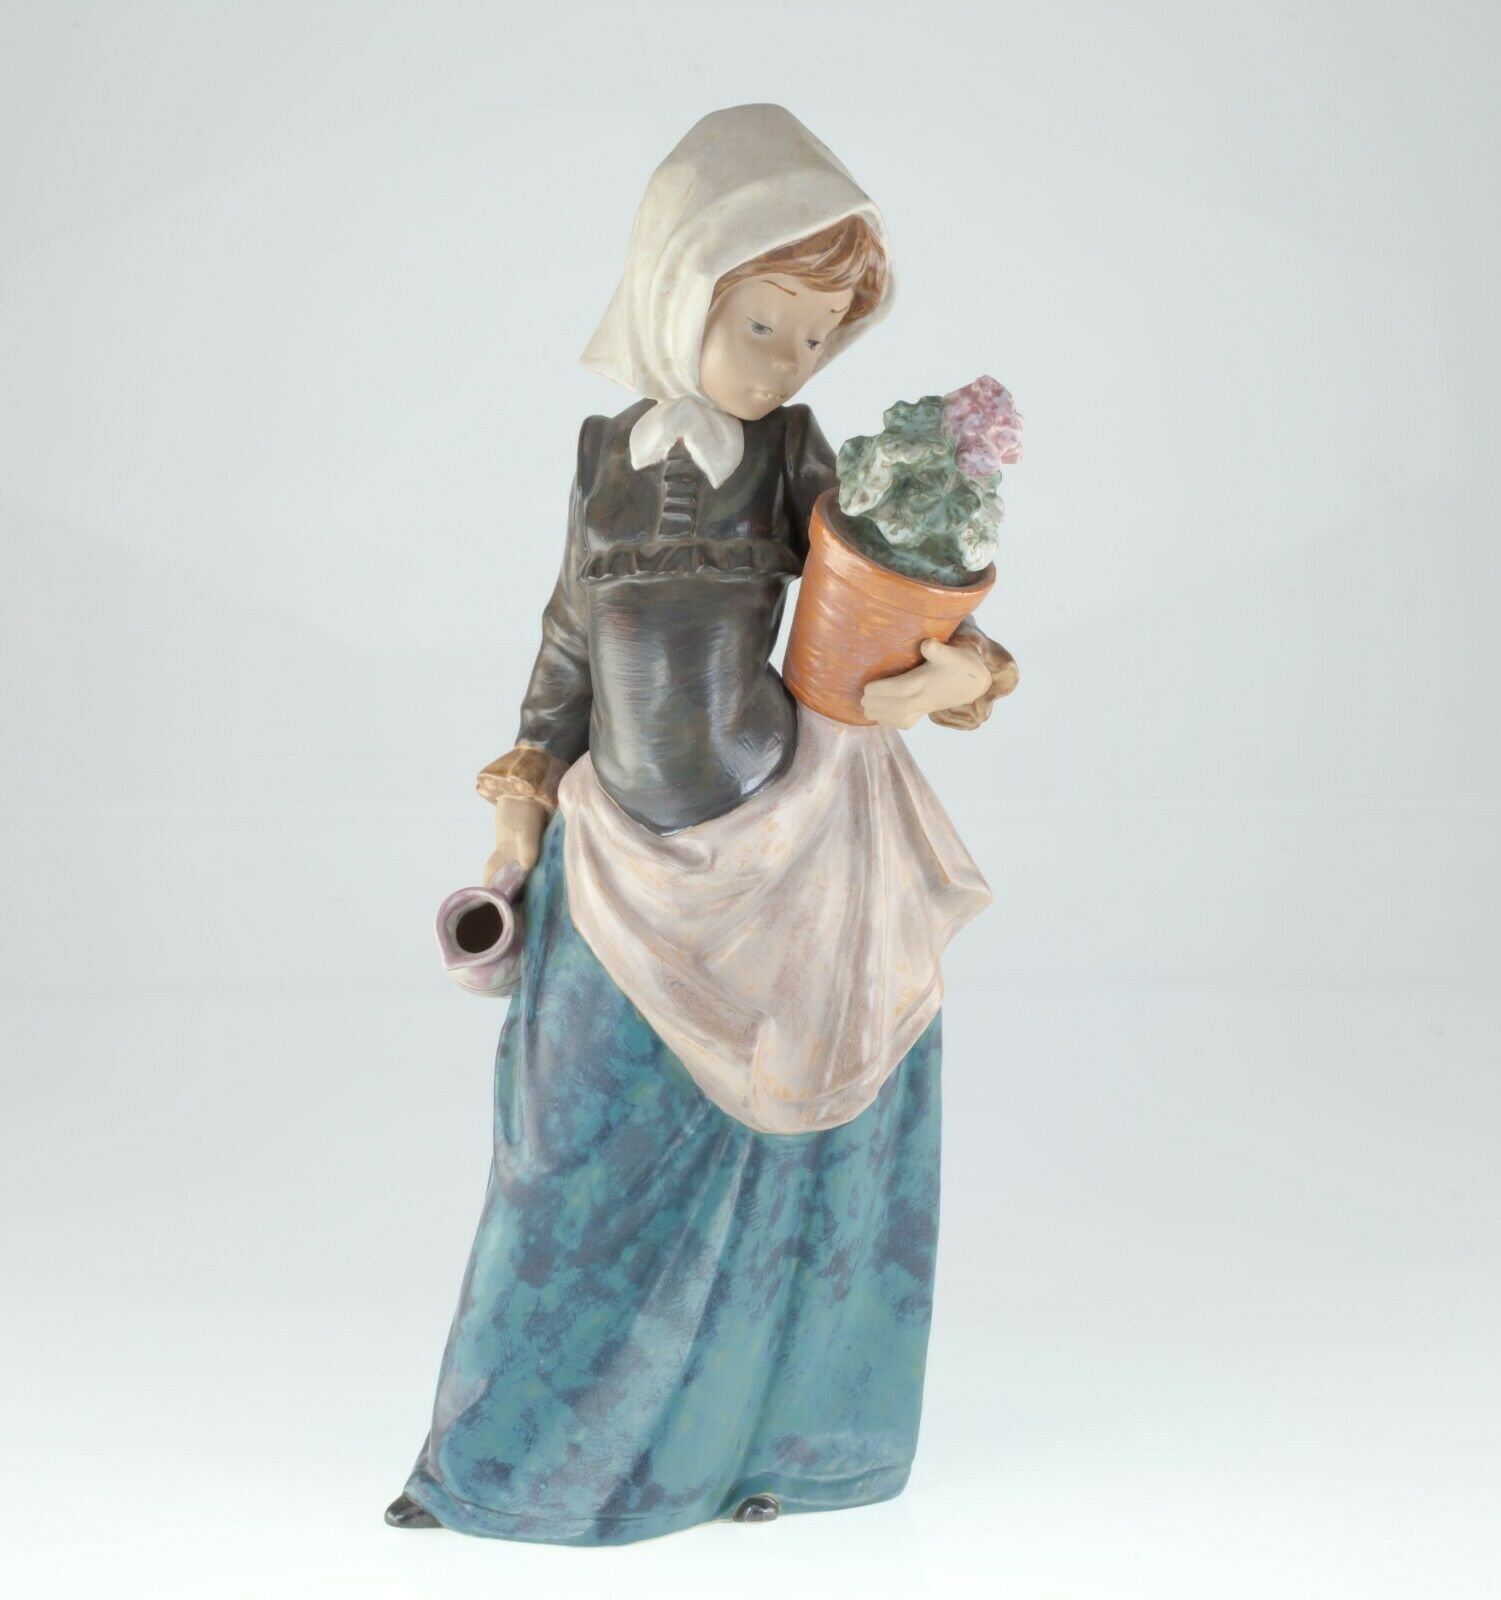 Primary image for Lladro "Girl with Geranium" 3508 No Box Nice Condition!